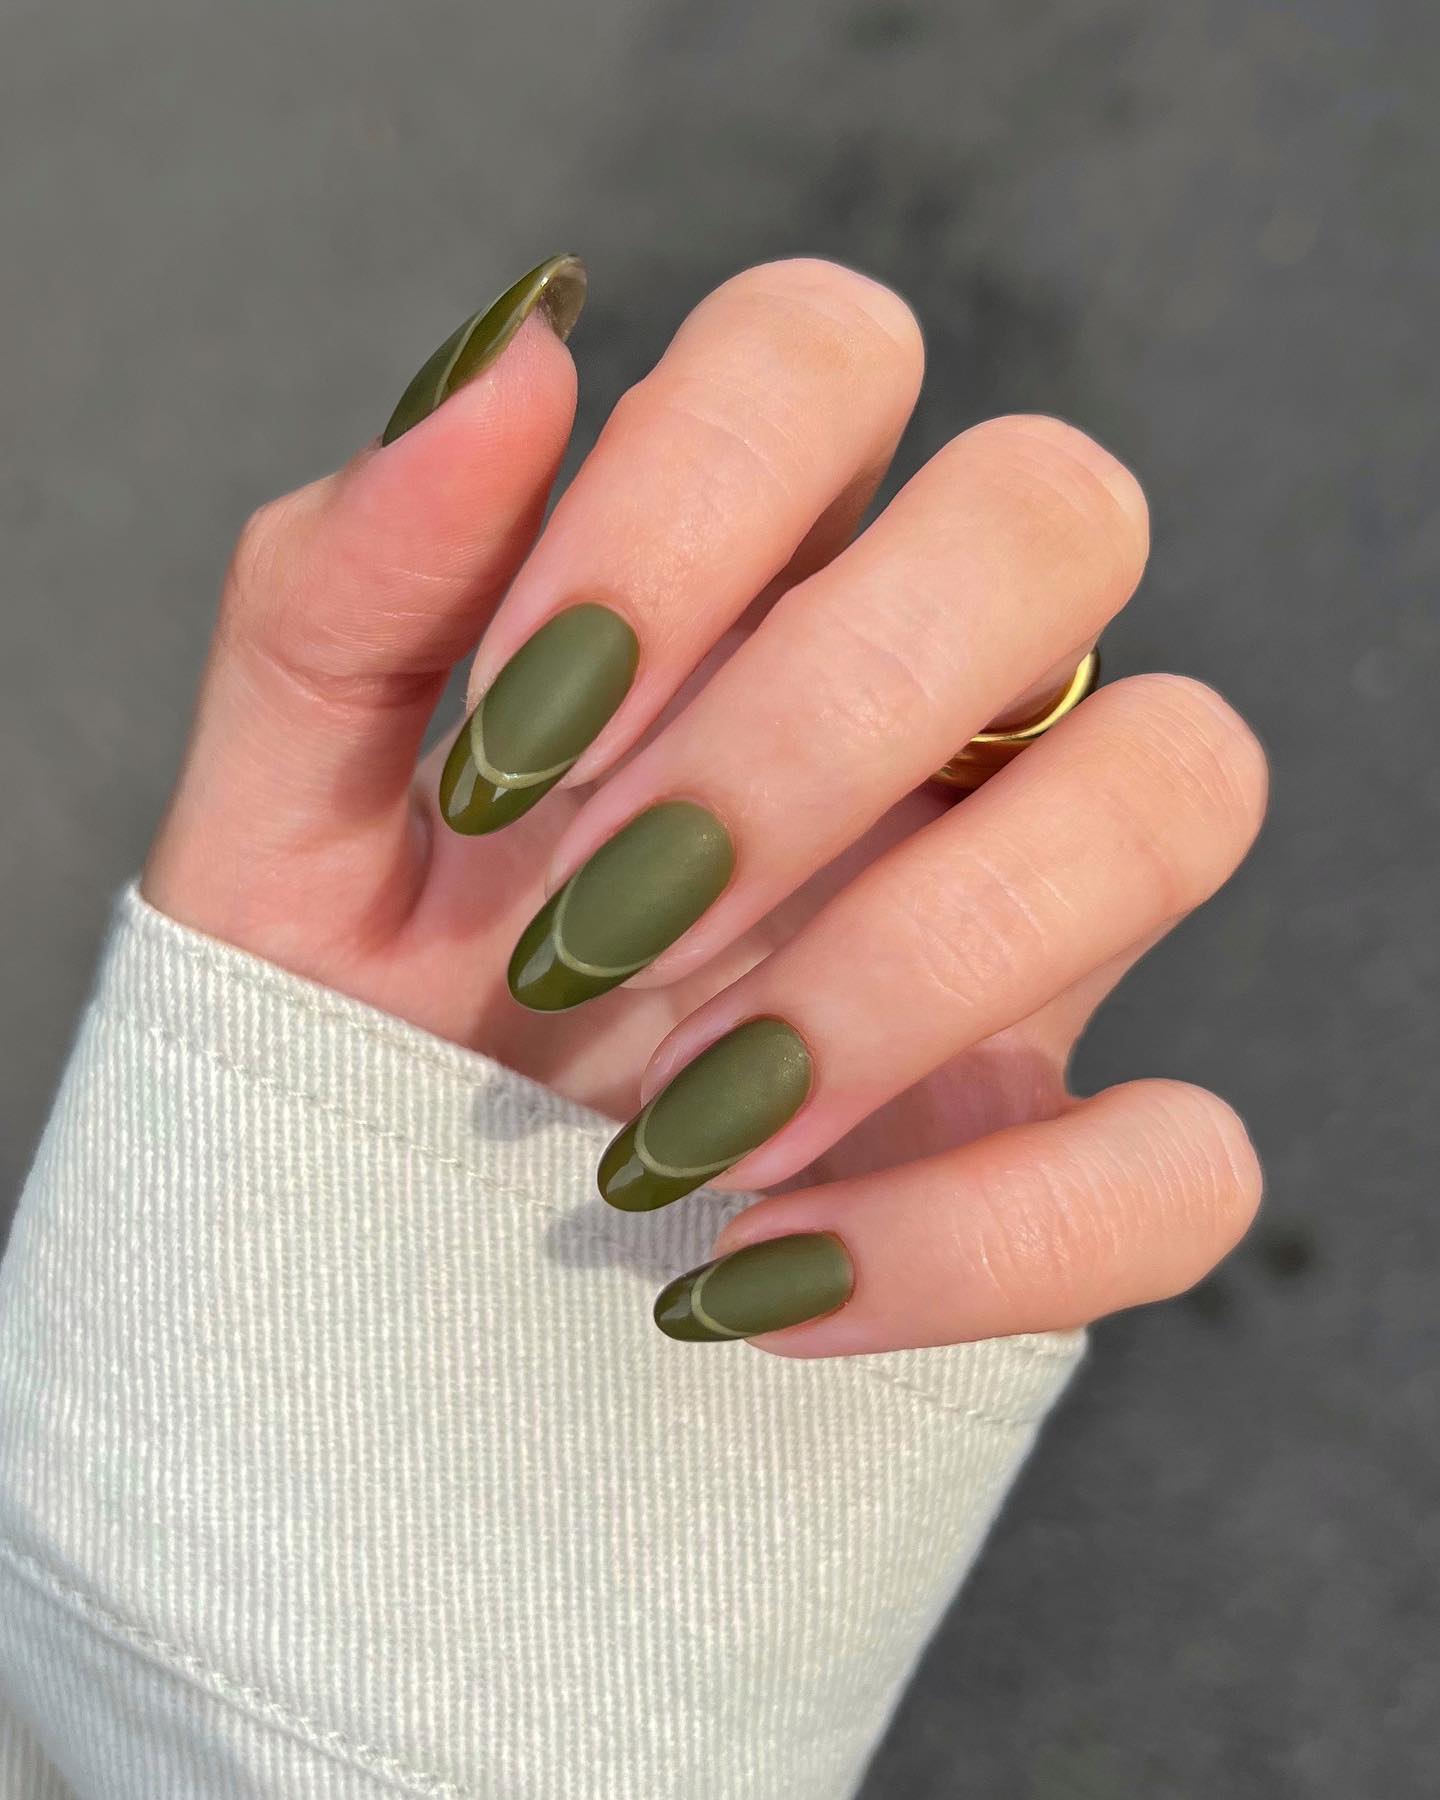 Shiny and matte nail polishes are equally amazing. And you know what? You can combine them together so that you don't have to choose one. For your khaki matte nails, apply a French mani with shiny version of this color on tips. 